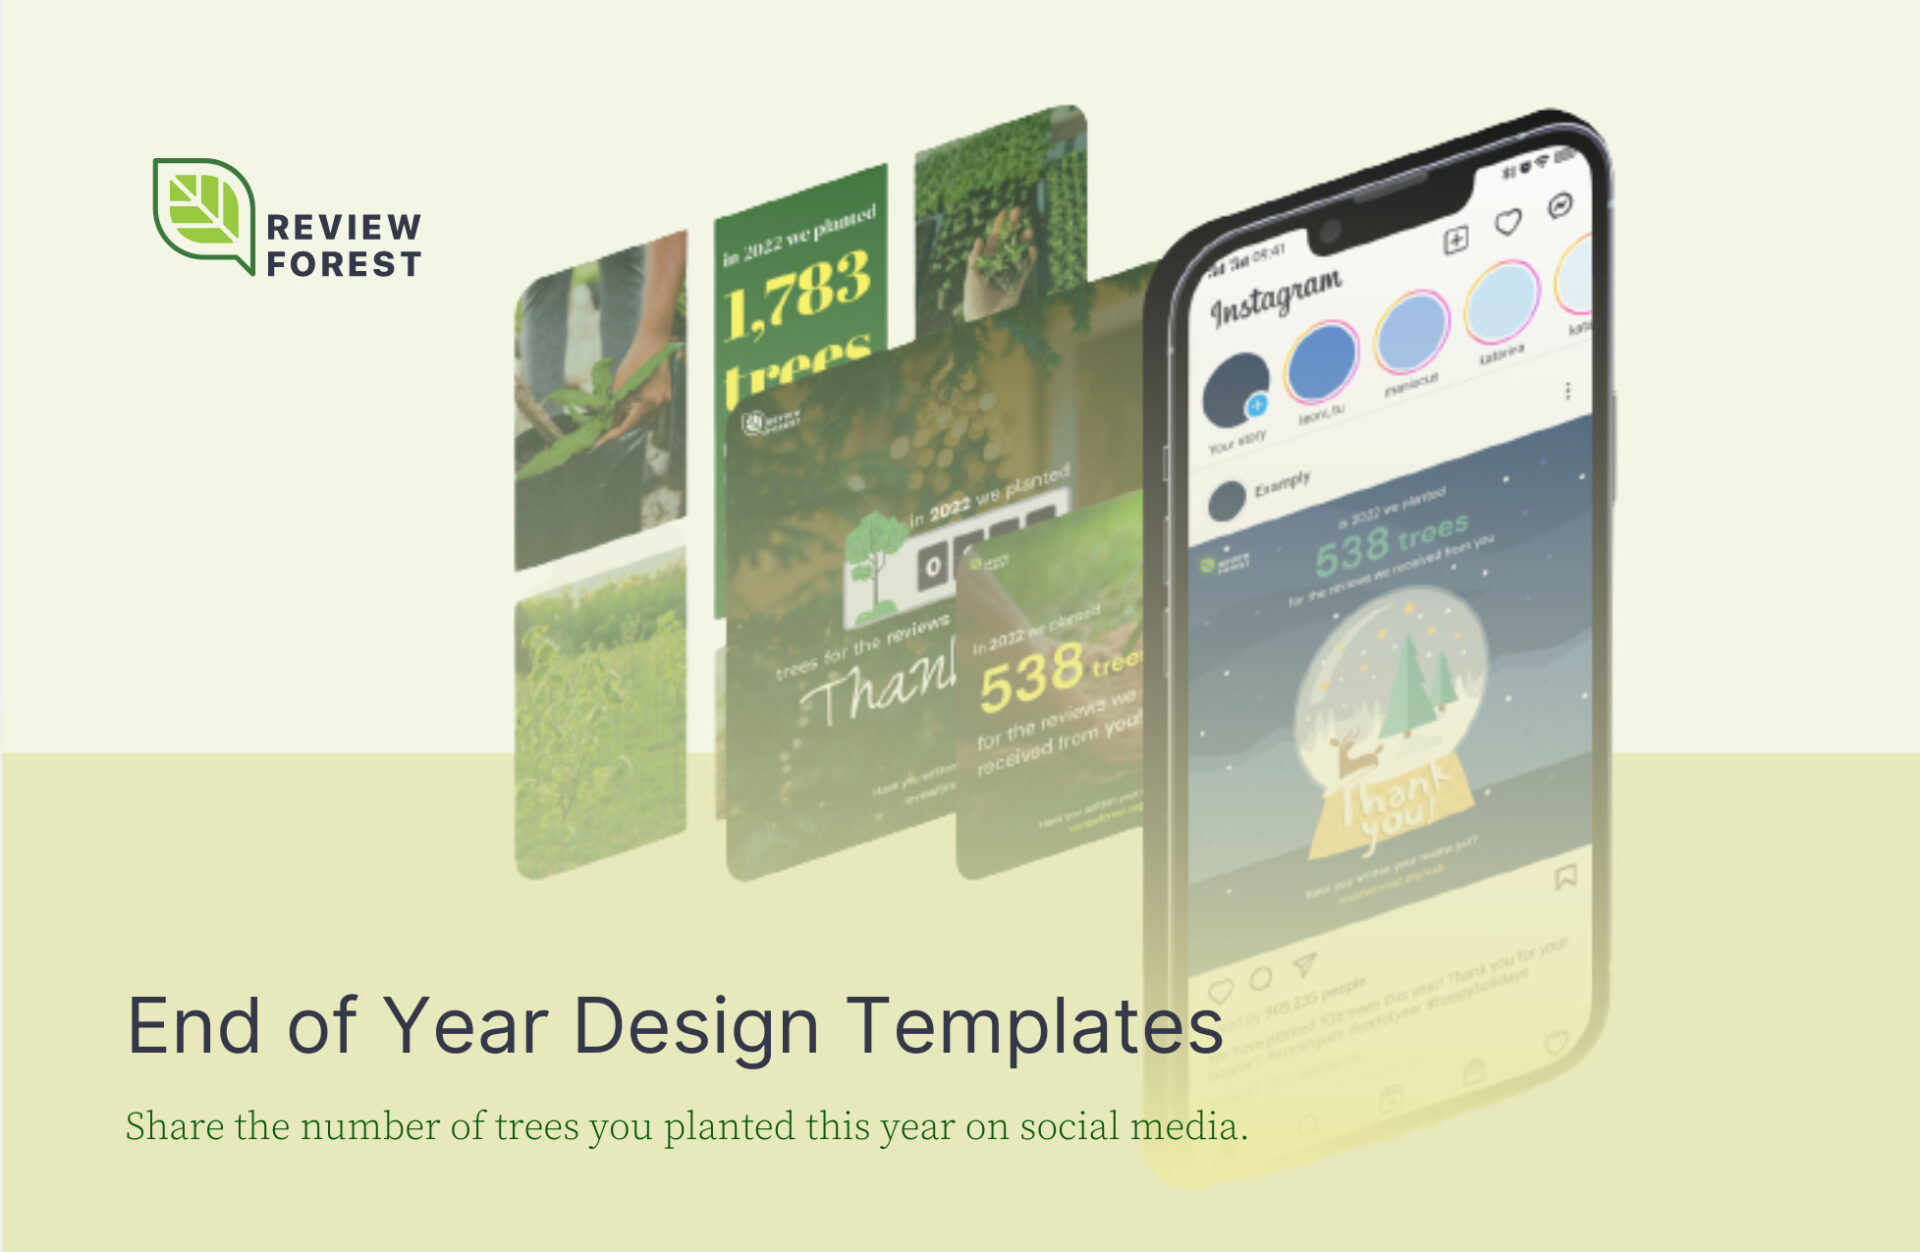 End of Year Design Templates